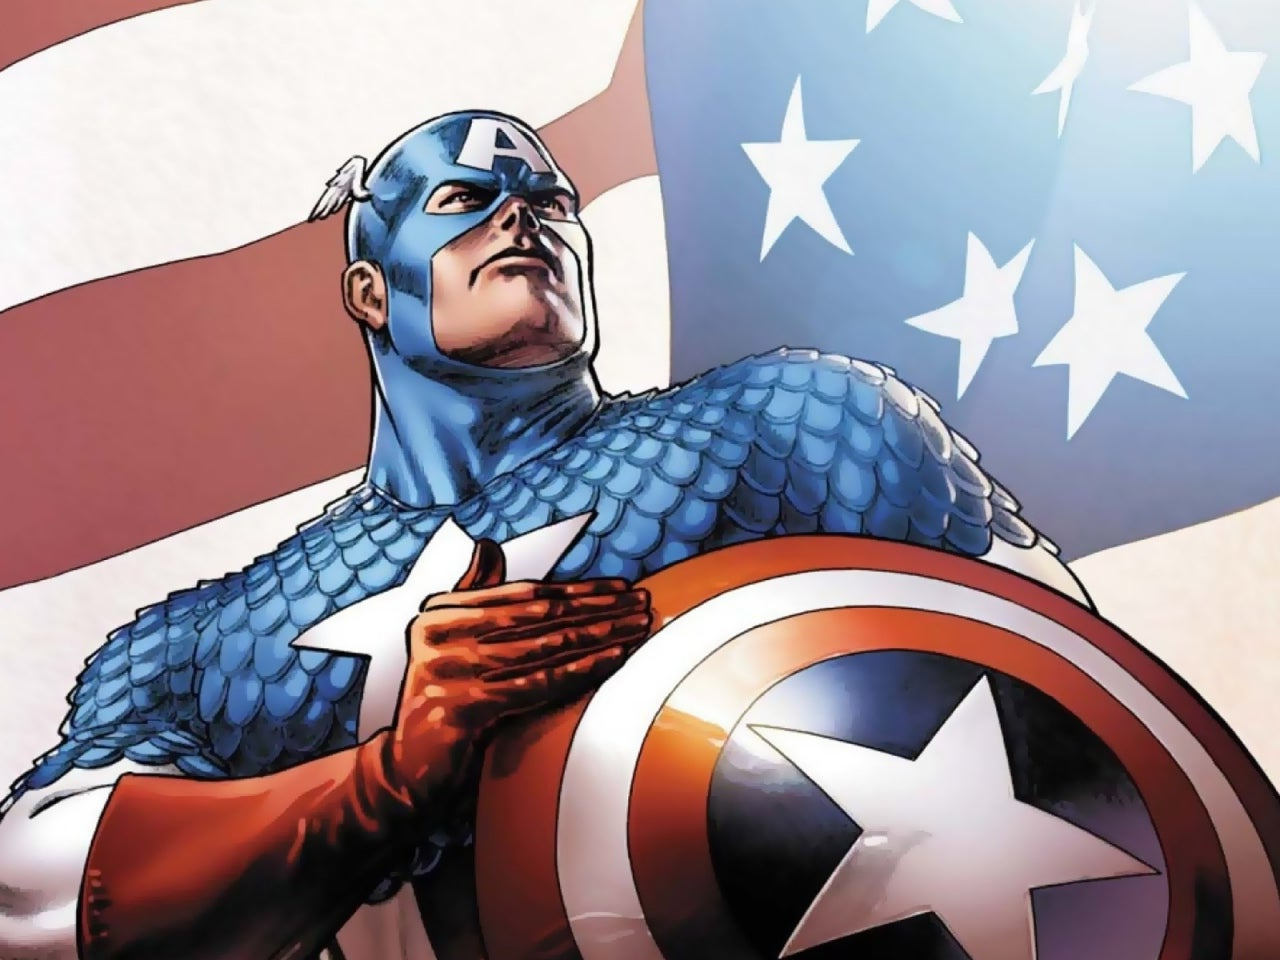 Dessin Captain America Unique Collection Marvel Ics Troll Fans with Implausible Captain America